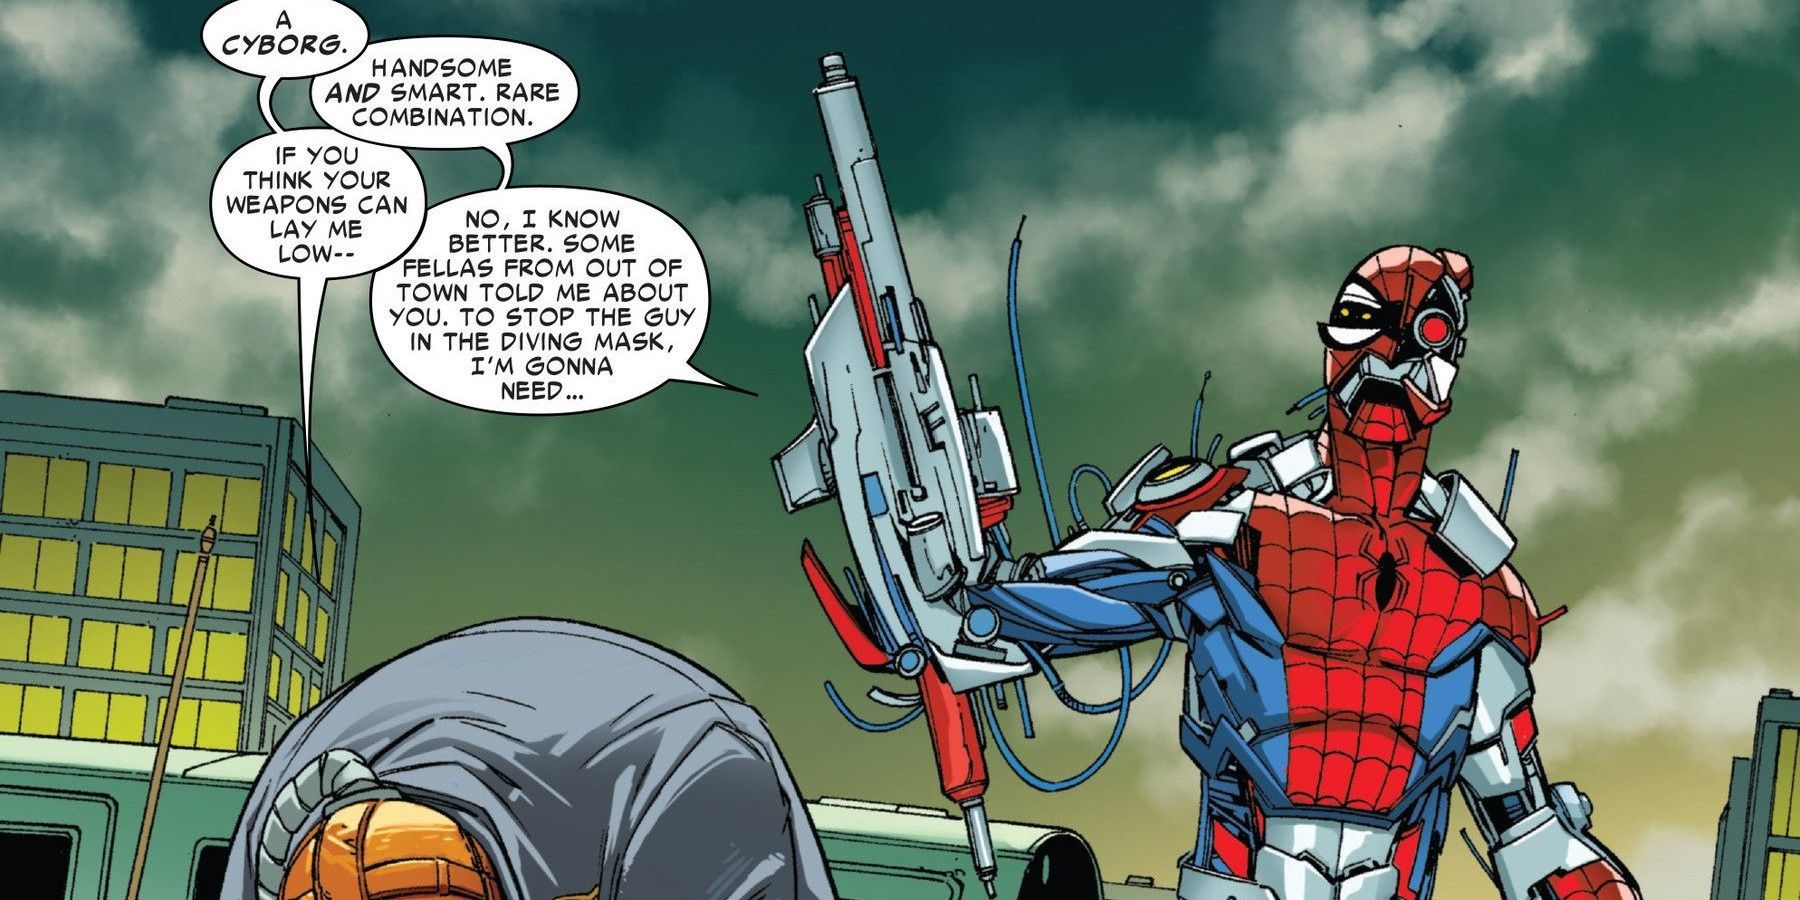 Spider-Man becomes a Cyborg in another universe